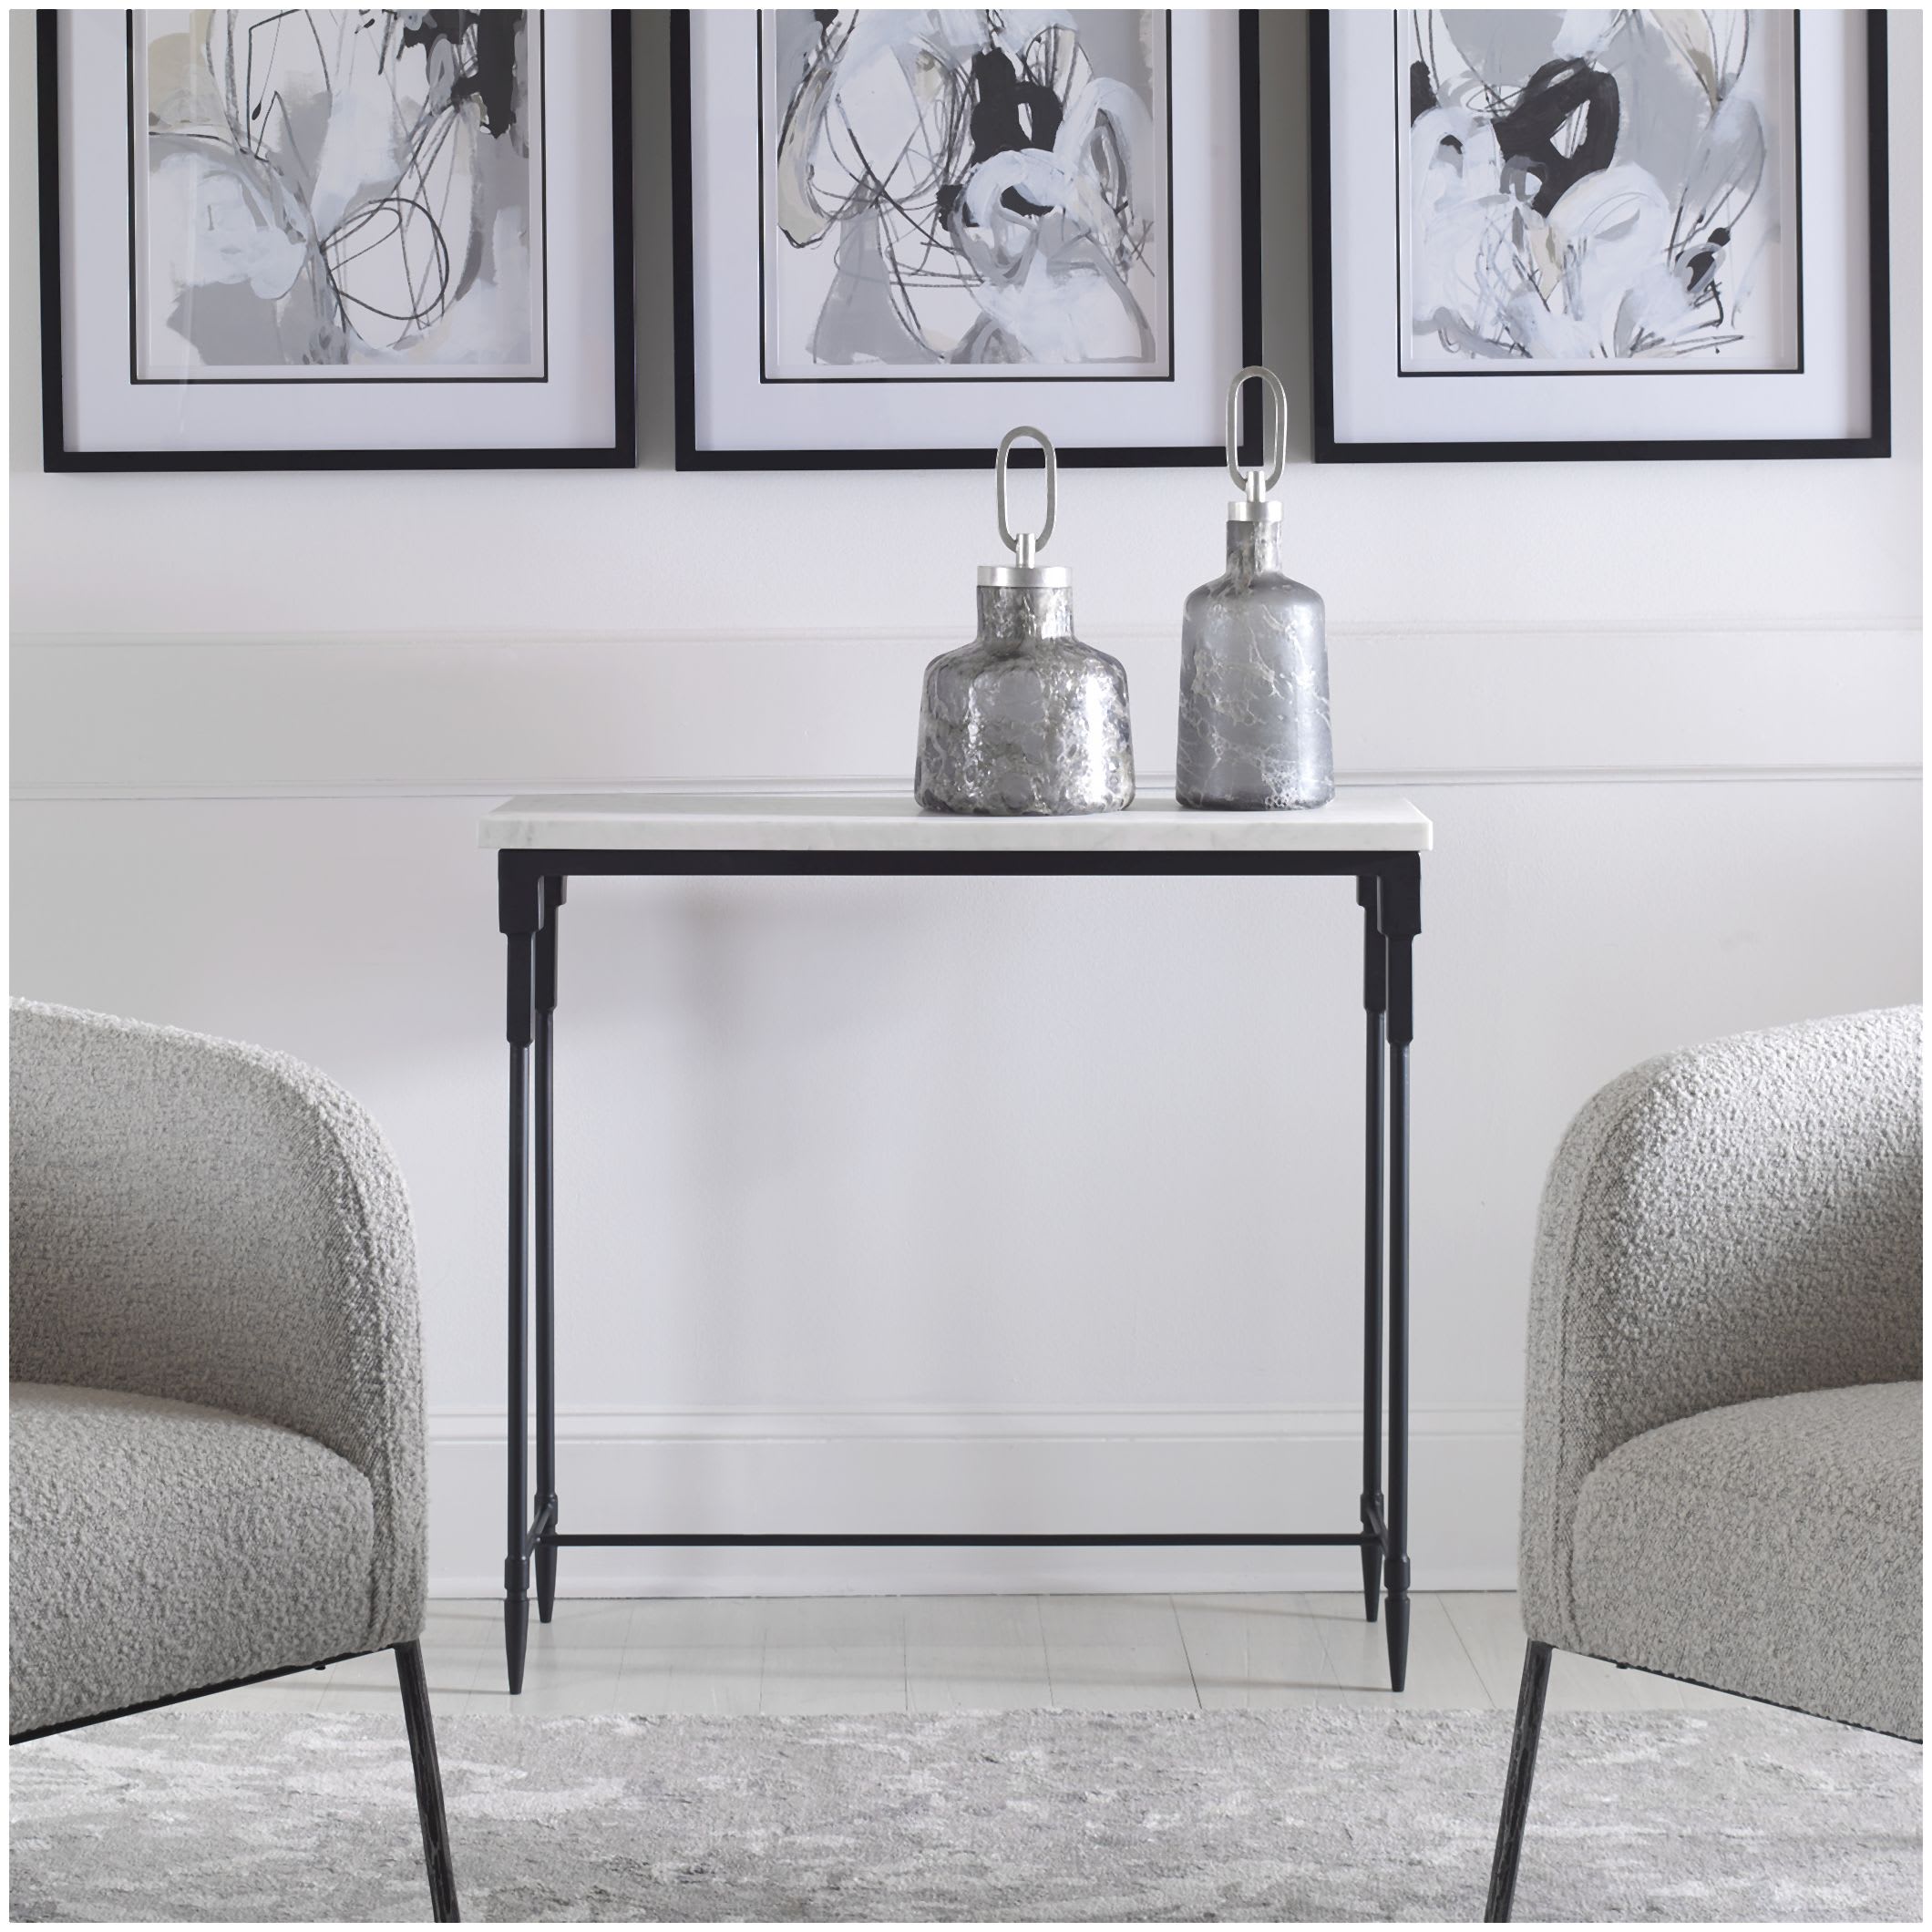 røg dannelse Pest Uttermost 25165 Black / White Bourges 36"W Modern Industrial Marble Top  Console Sofa Entry Hall Table - LightingDirect.com